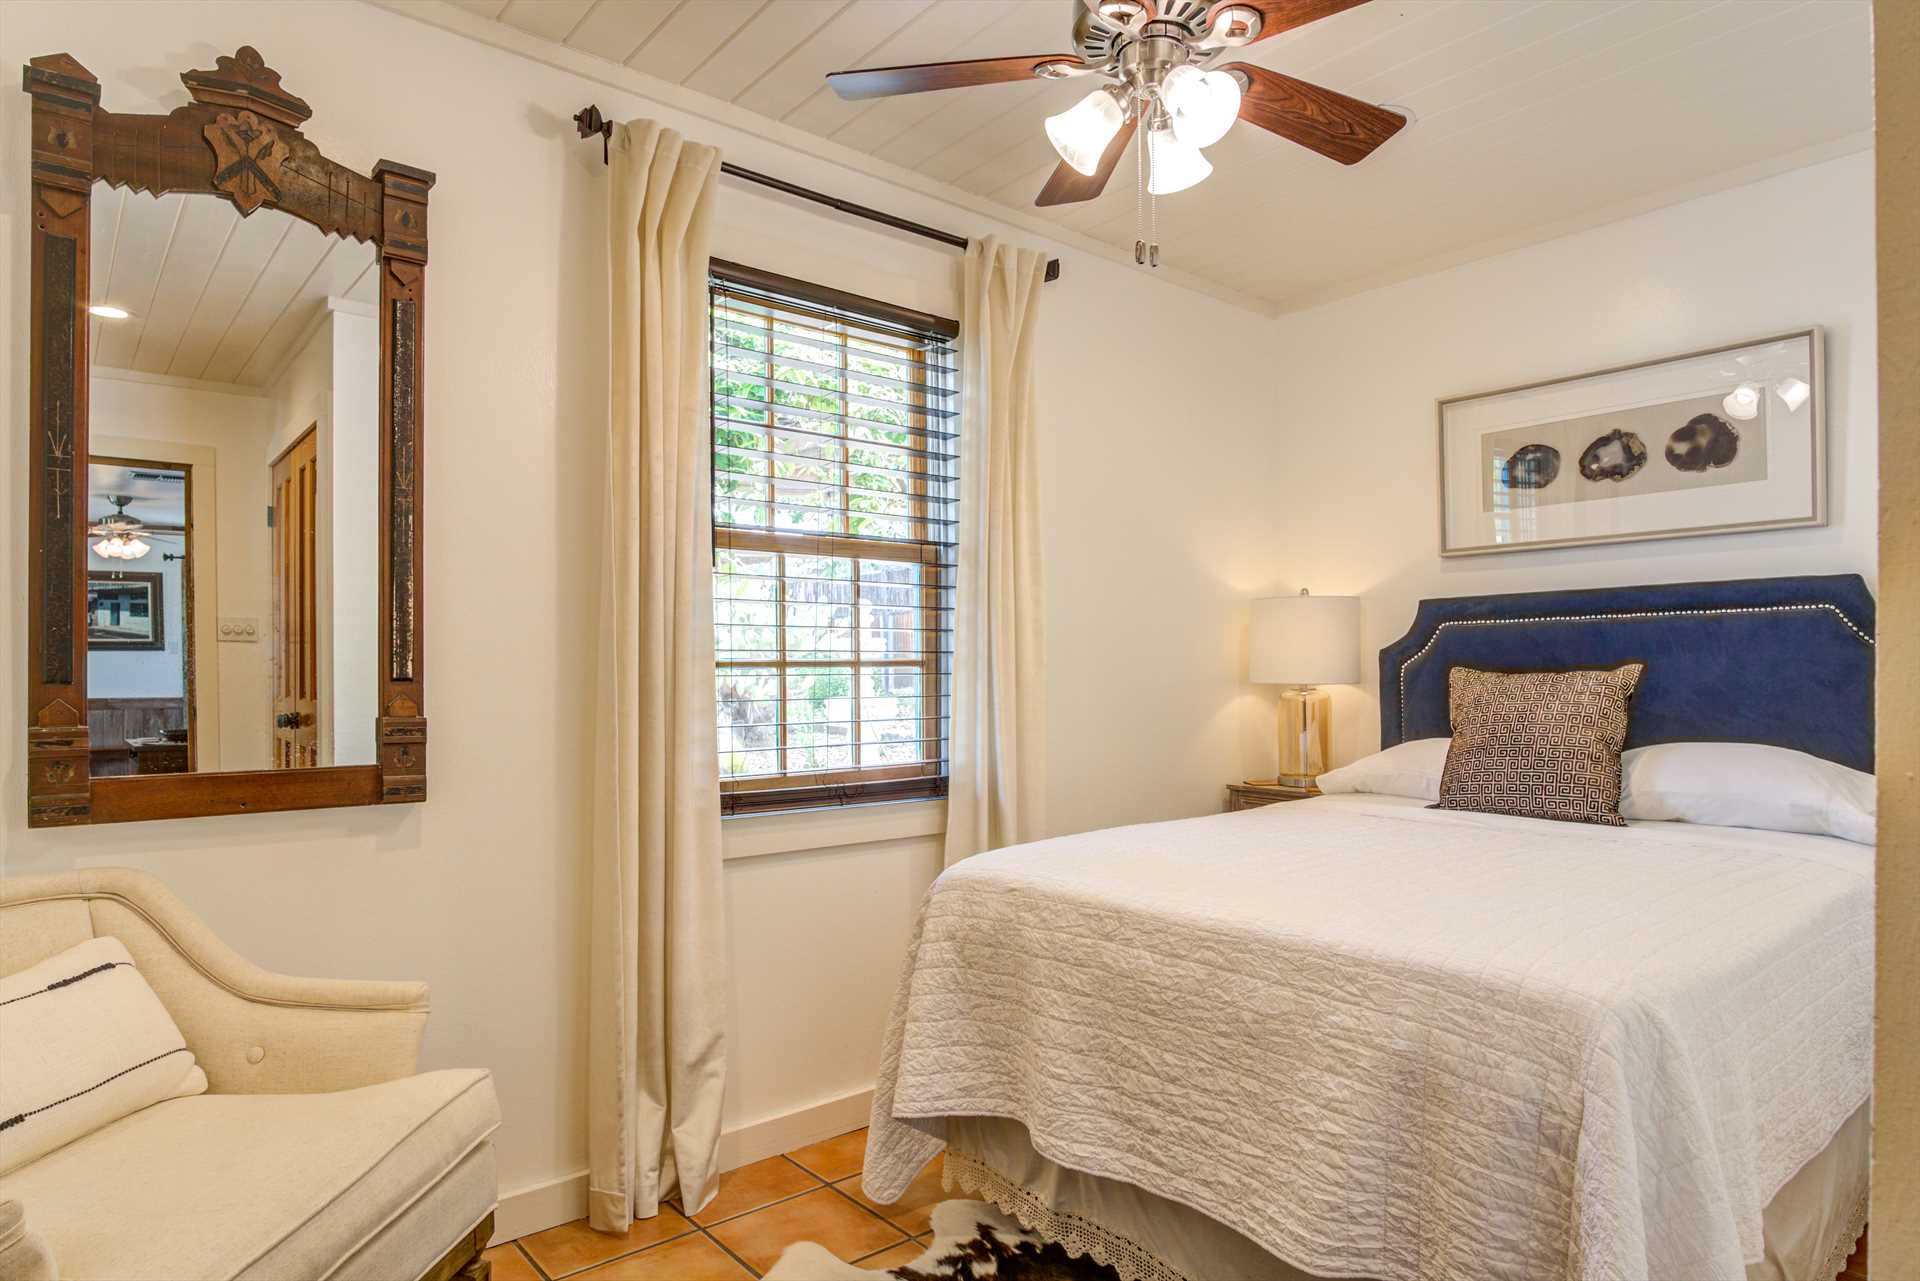                                                 A warm and soft double bed in the second bedroom provides peaceful sleep for two, draped in fresh linens.